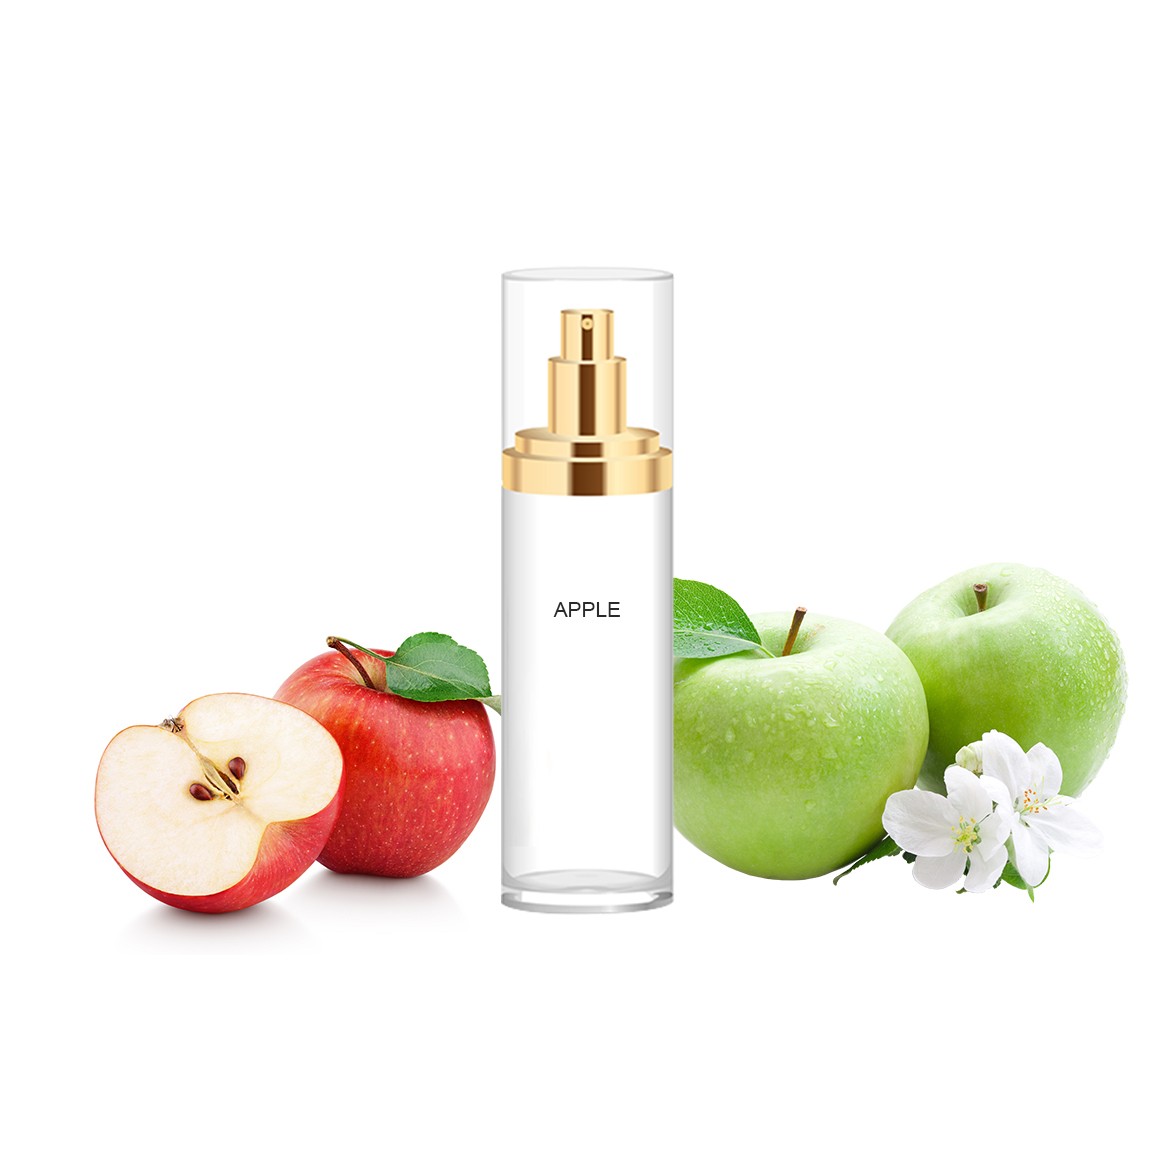 Fruity perfumes grounding scent super refreshing aroma Customize own brand scent with high quality compounds